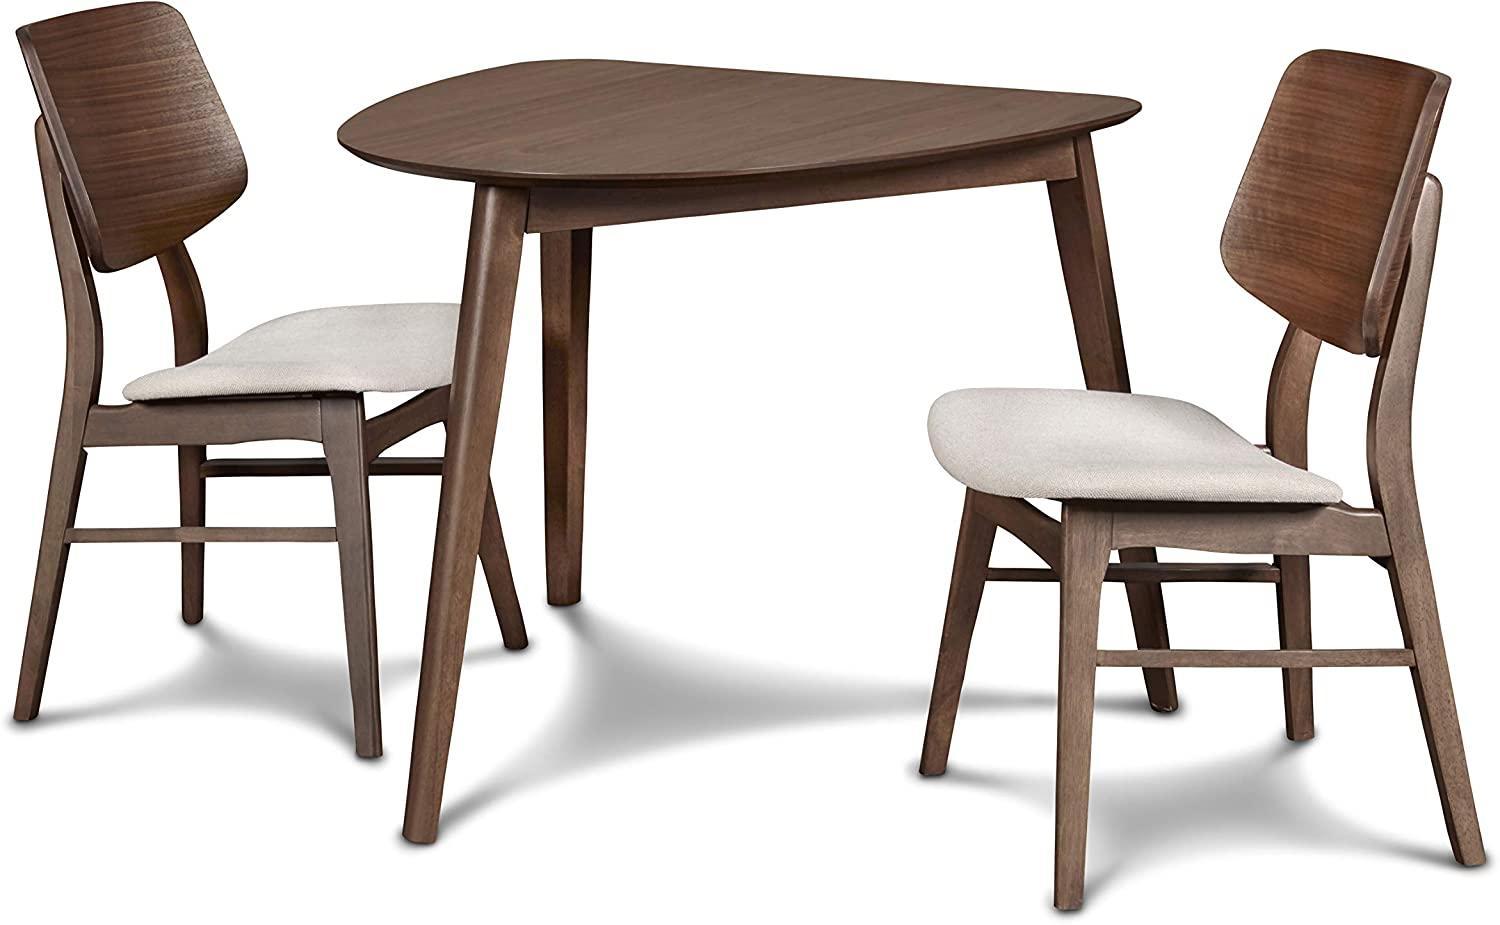 Modern Corner Dining Set with Natural Fabric Seat Cushions